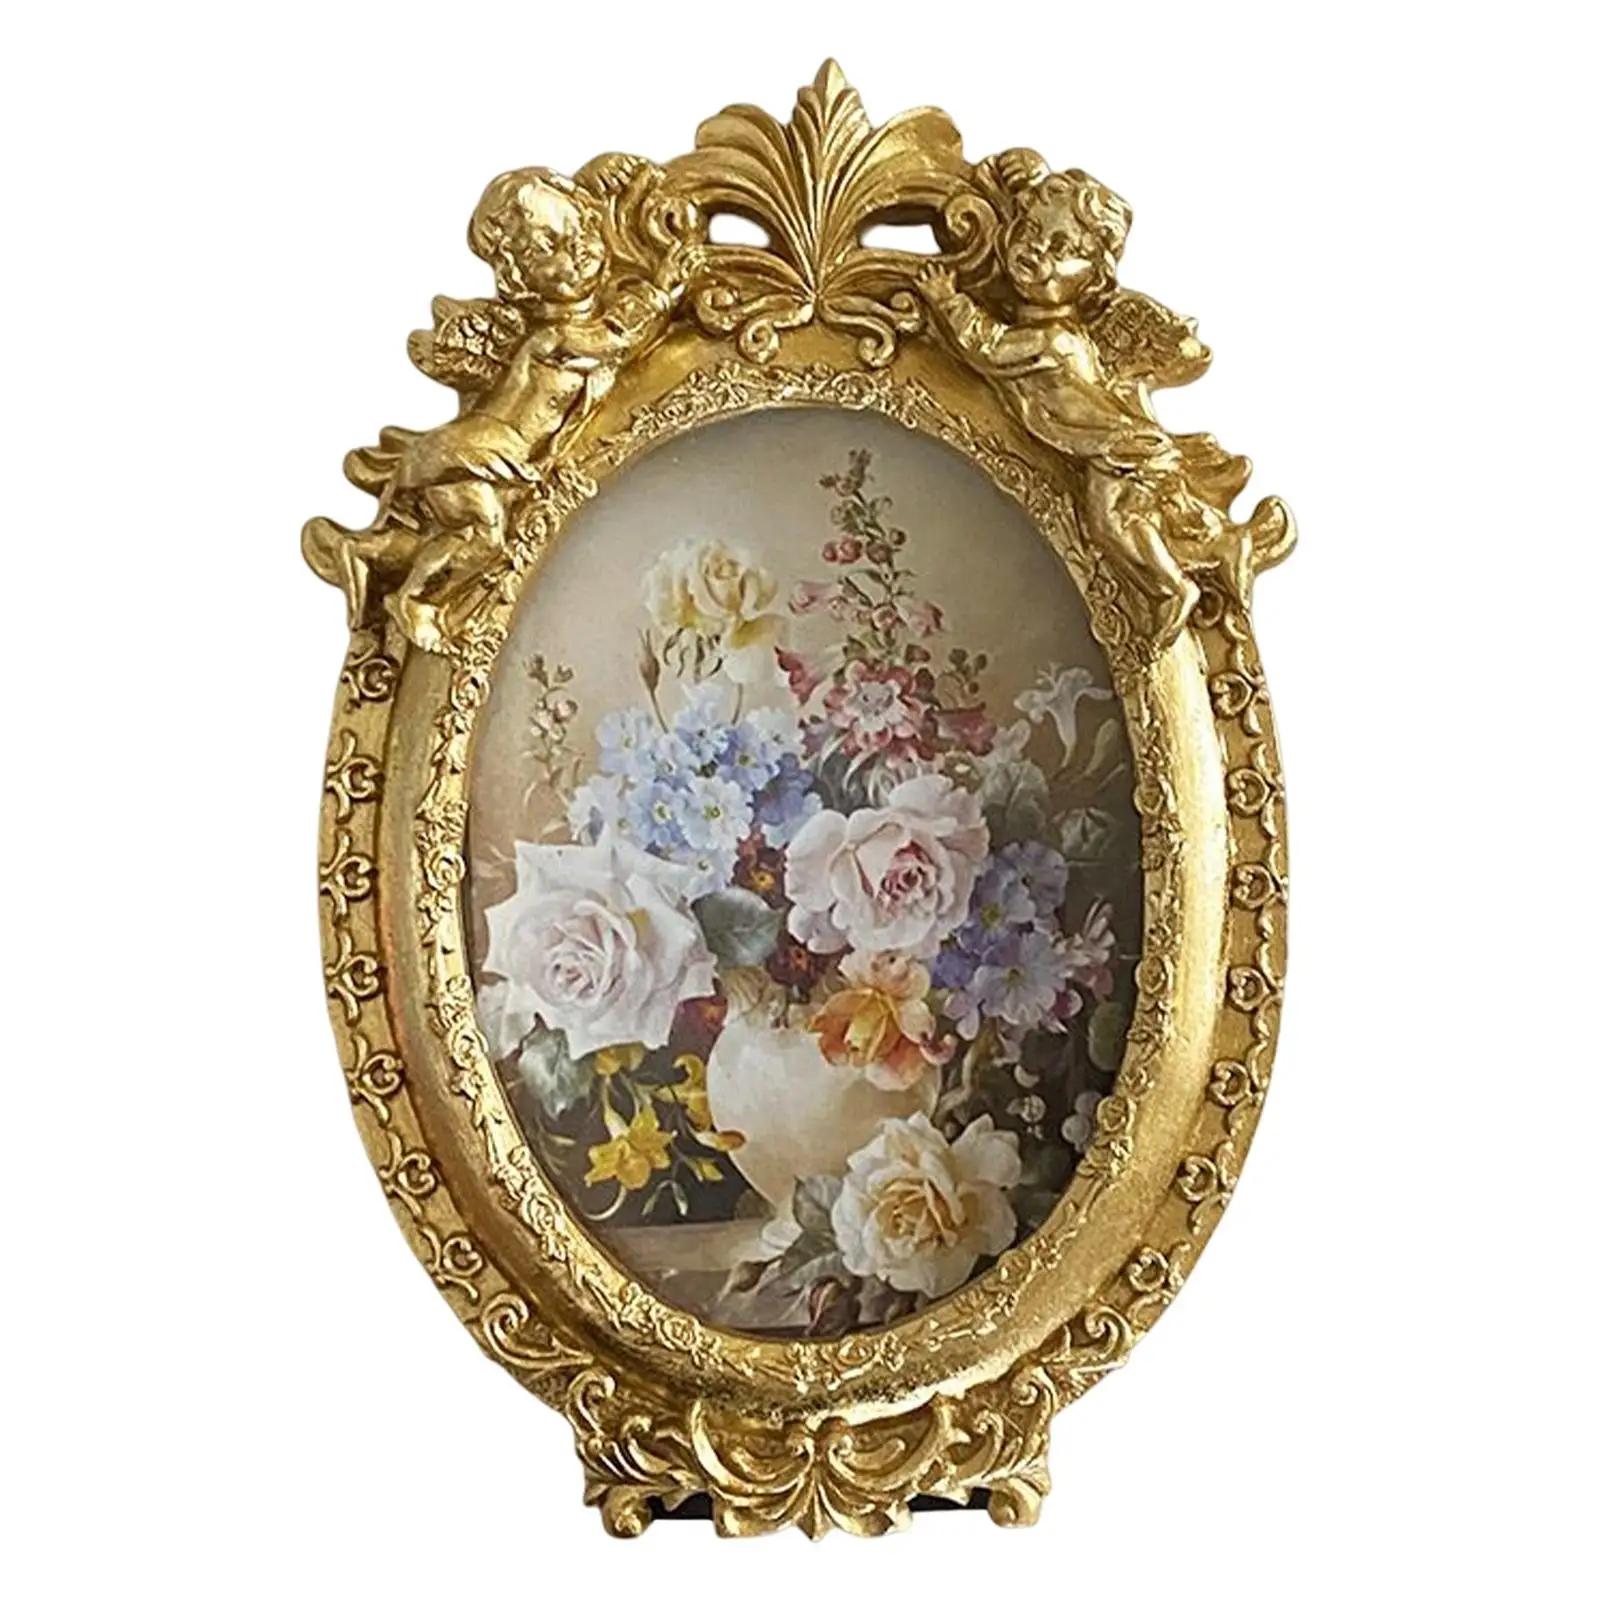 Country Style Photo Frame Picture Display Holder Decoration Ornate Resin Picture Frame for Kitchen Holiday Bedroom Home Office